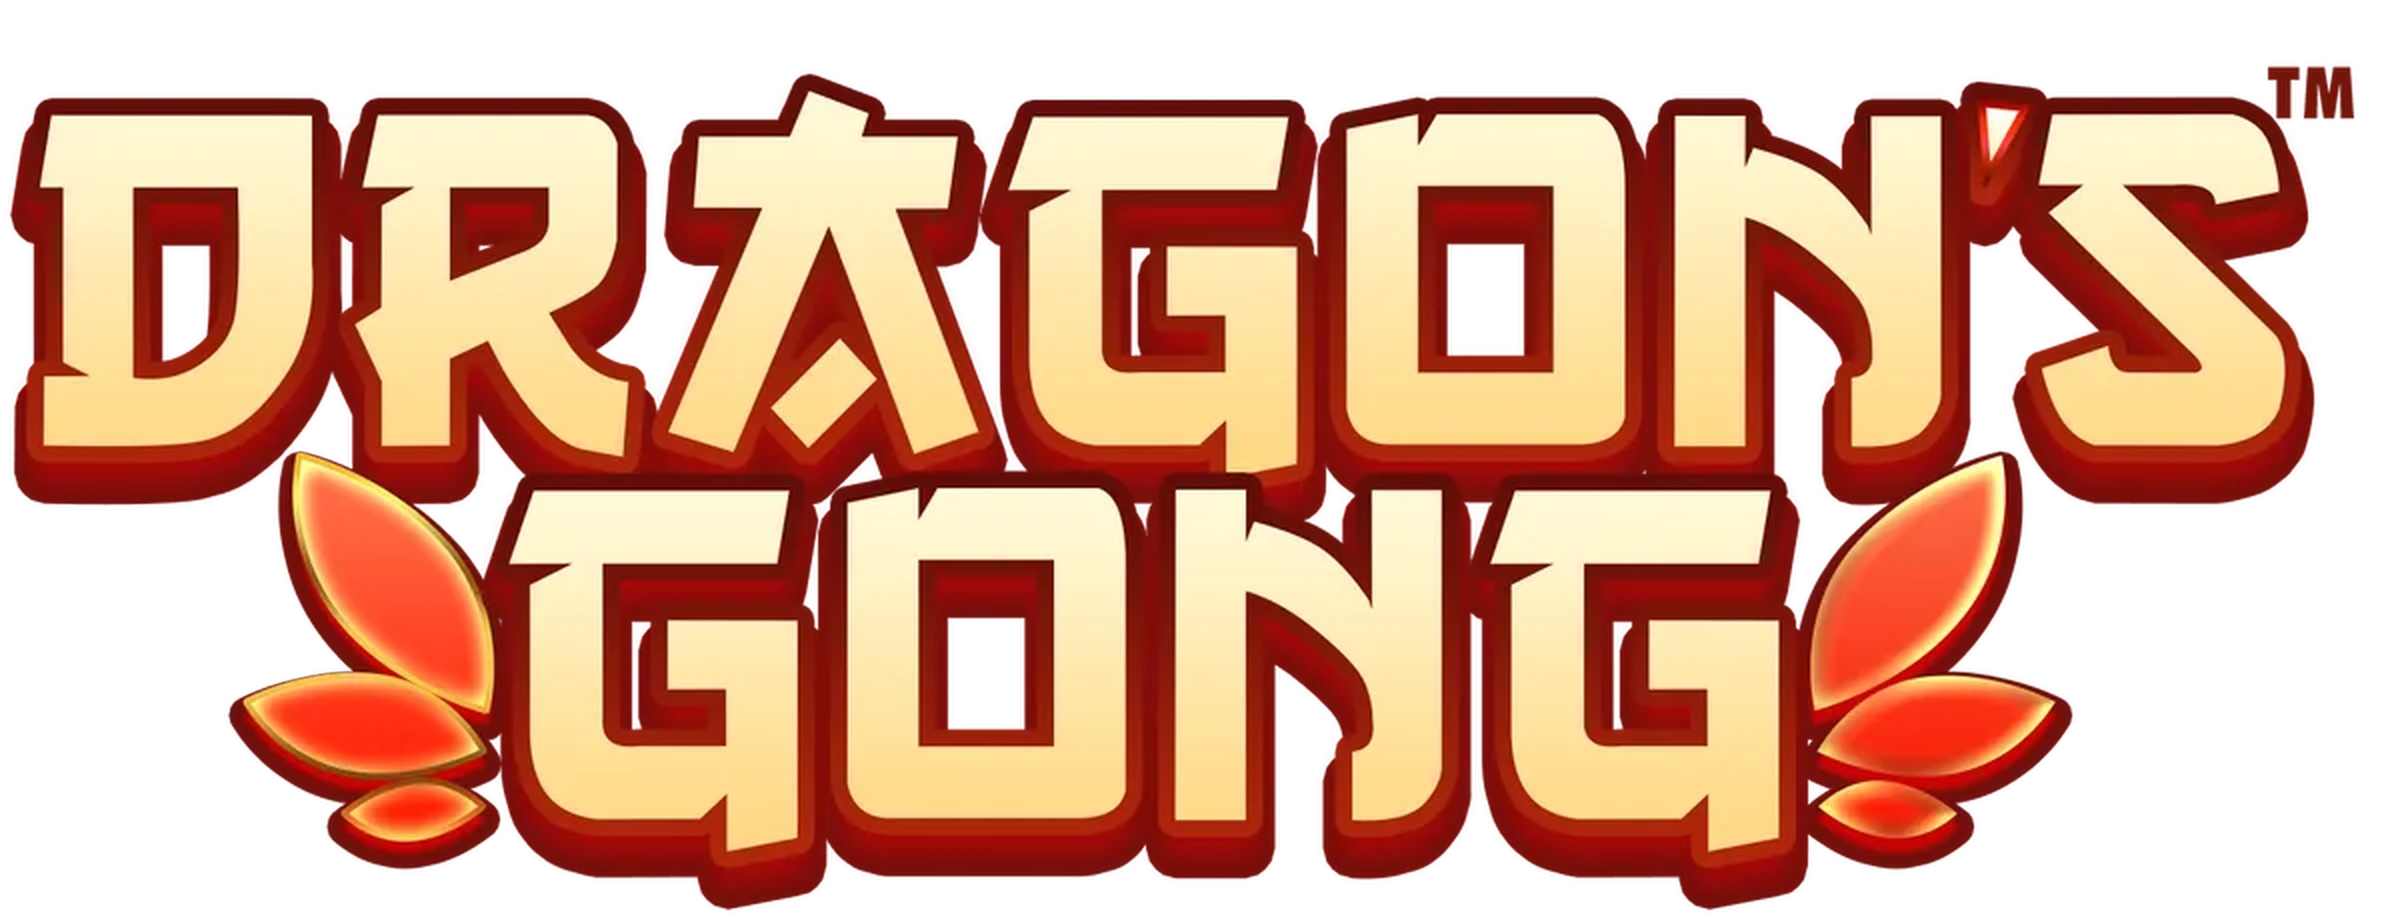 The Dragon Dozer Online Slot Demo Game by Skywind